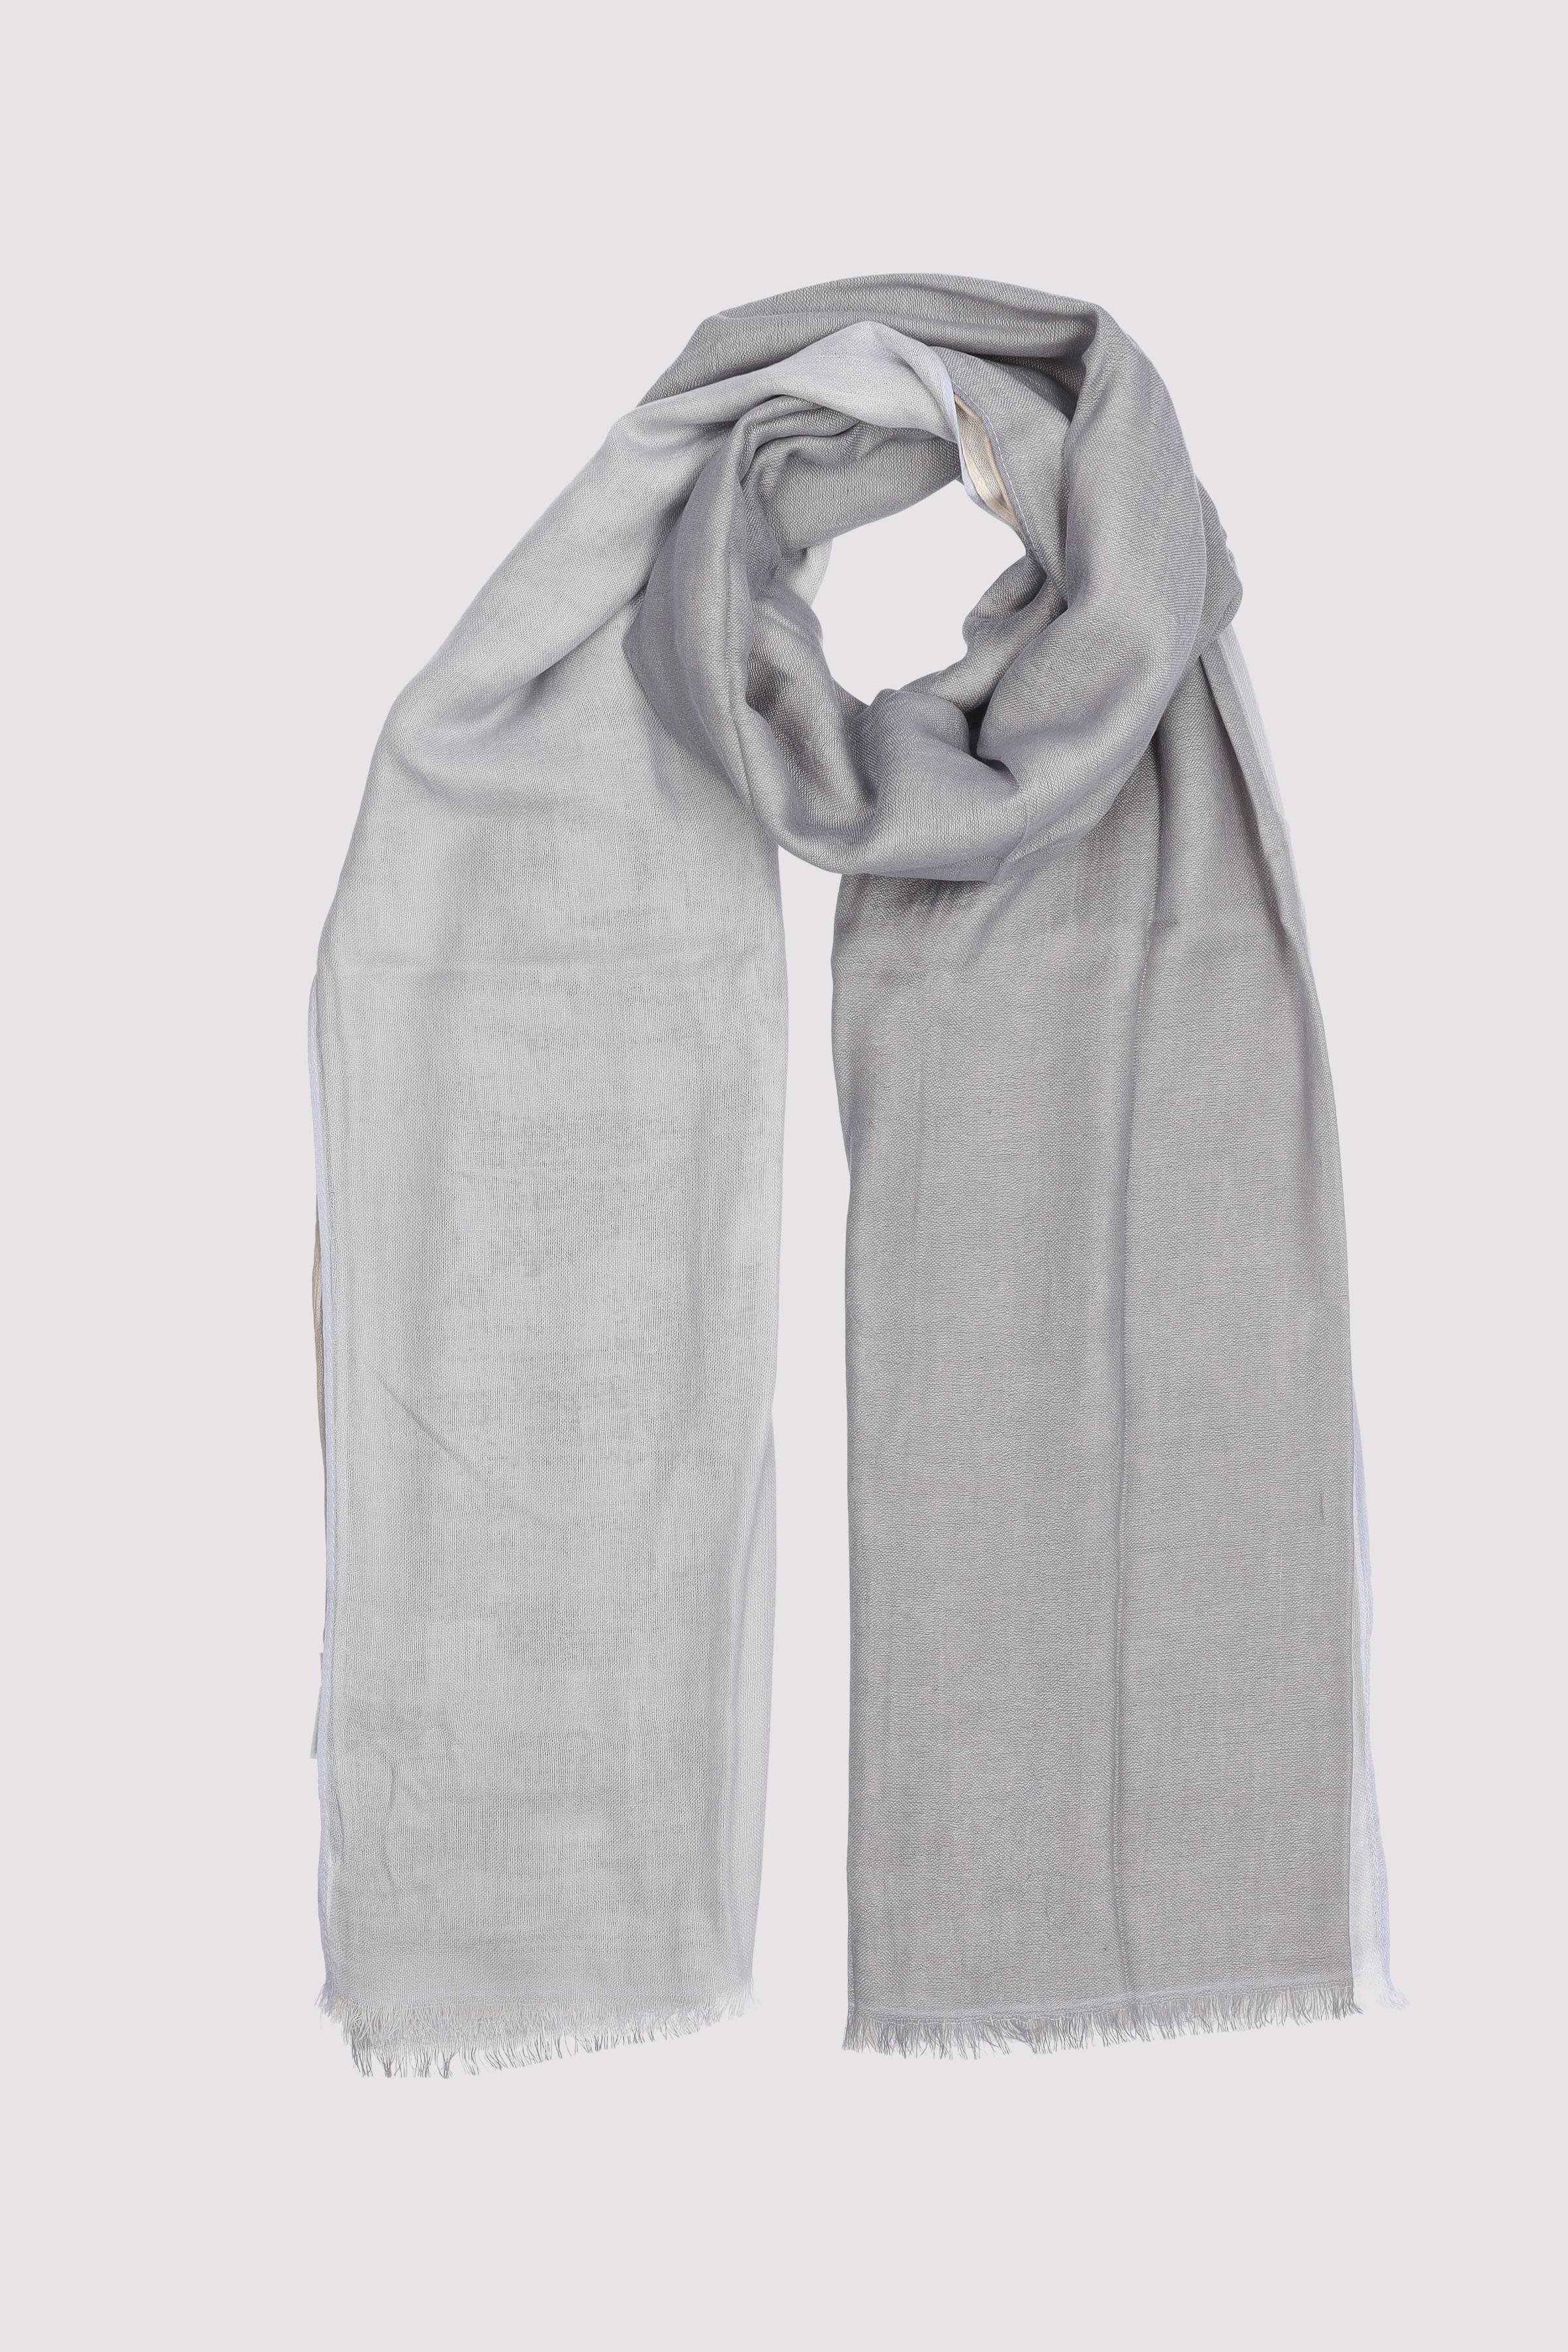 Scarf, woven, double-layer in 